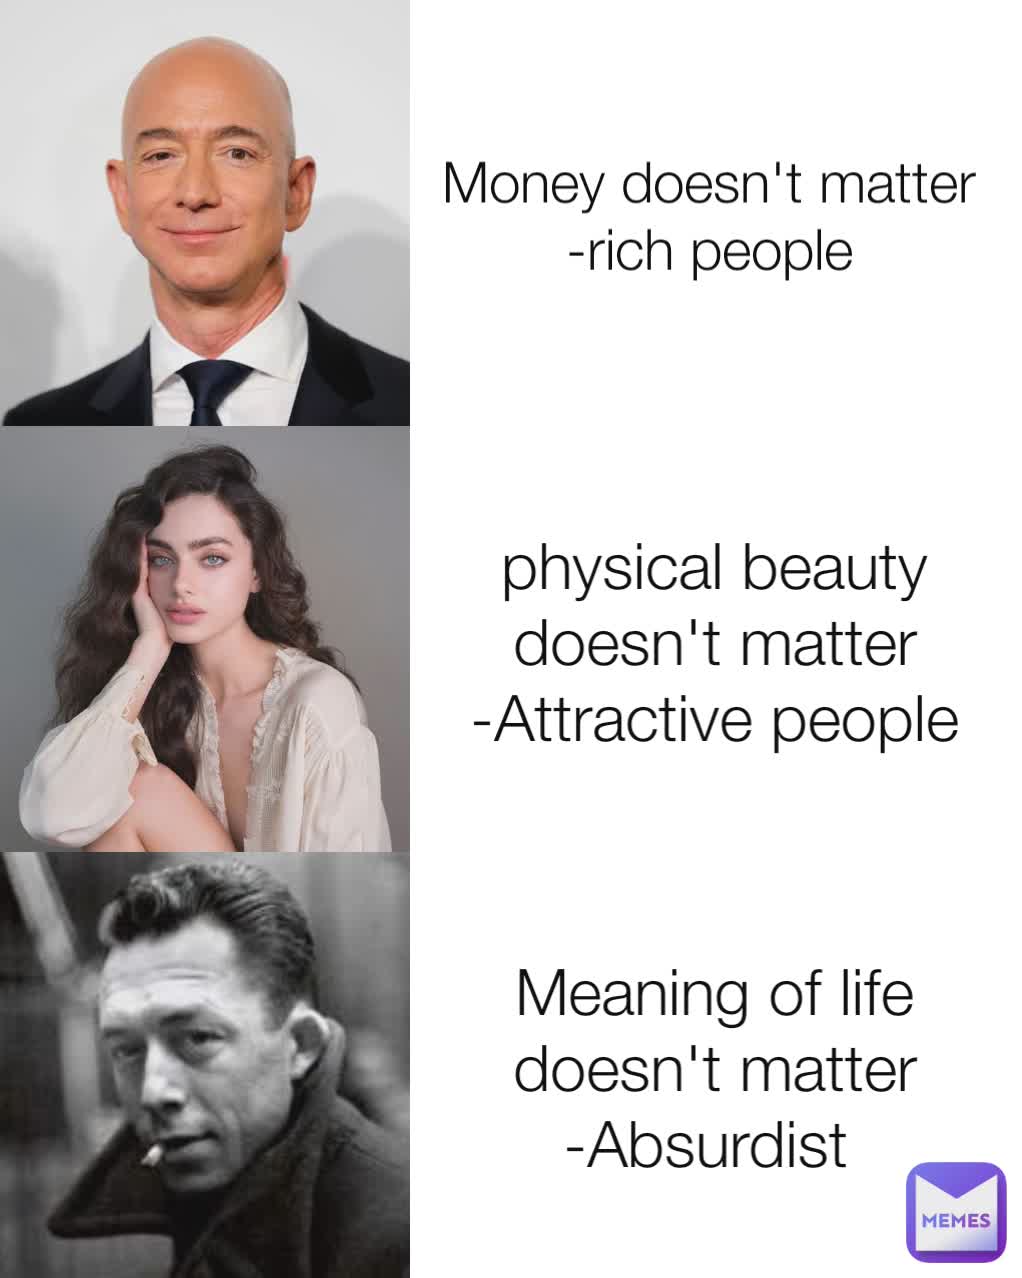 physical beauty doesn't matter
-Attractive people Meaning of life doesn't matter
-Absurdist  Money doesn't matter
-rich people